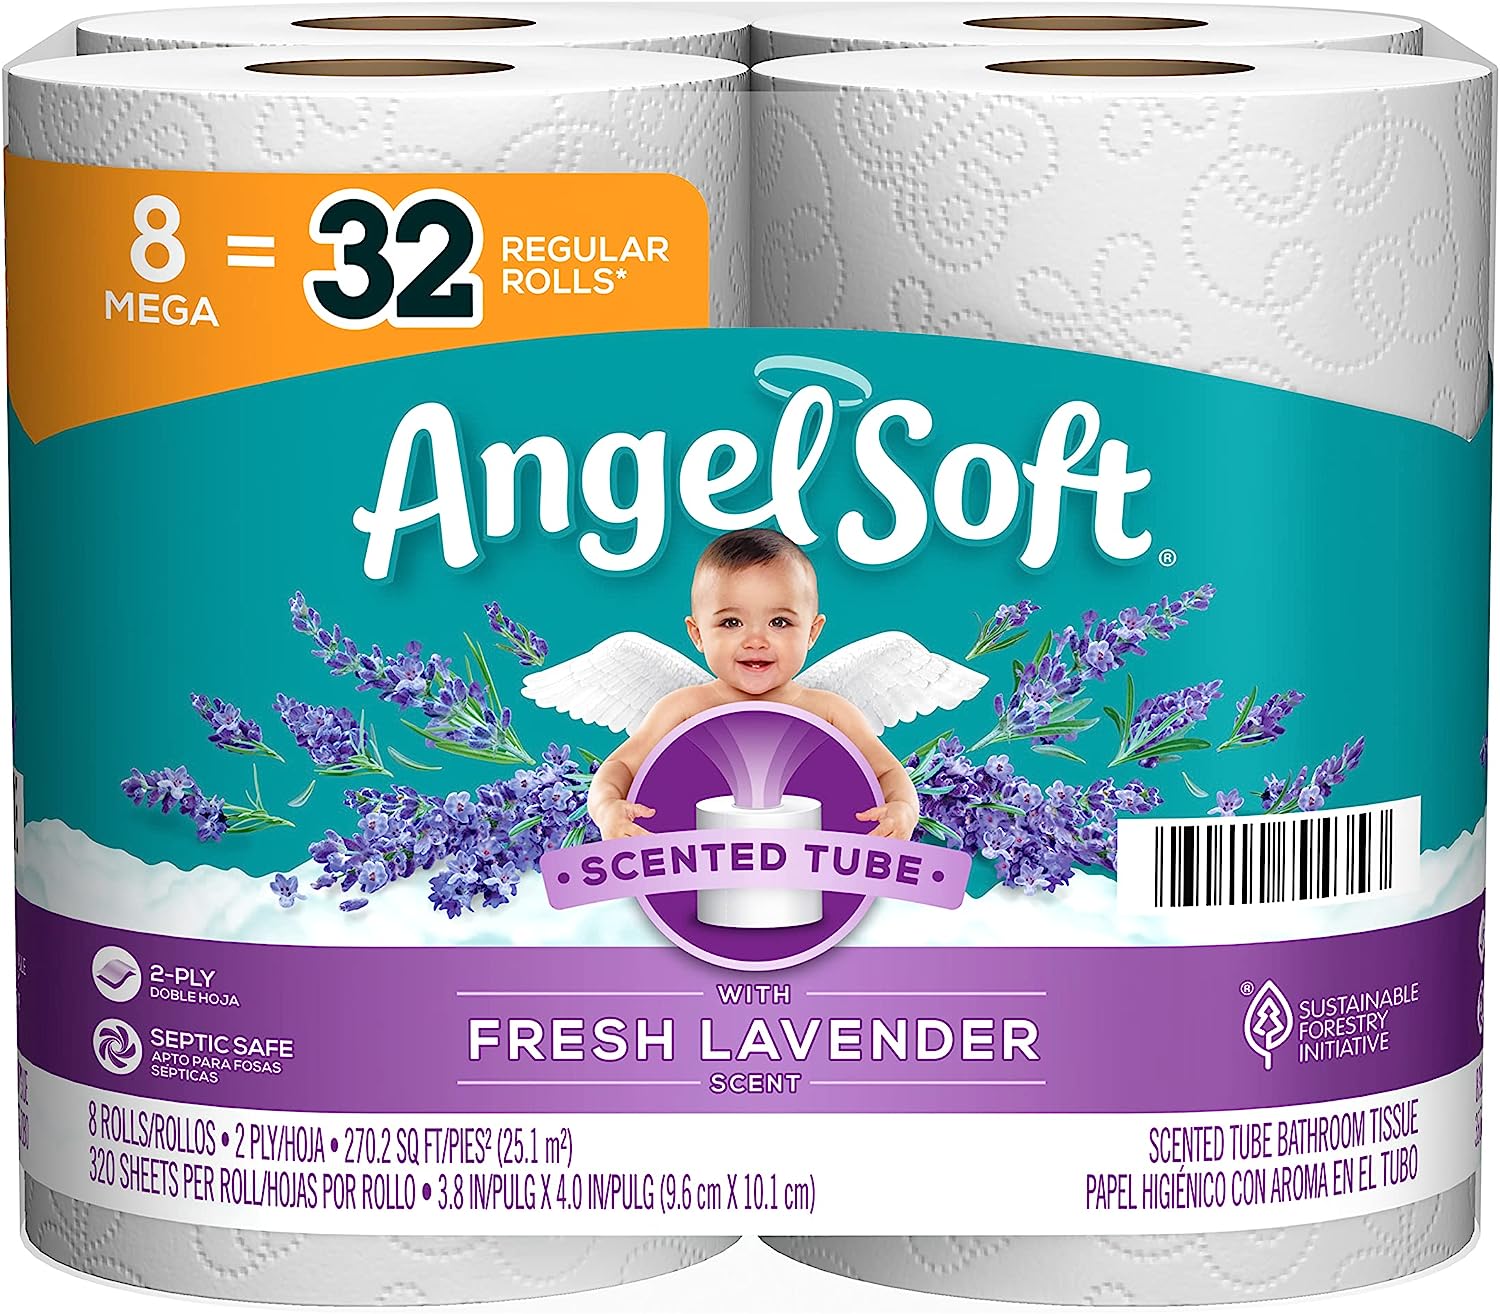 8-Count Angel Soft Mega Rolls (Fresh Lavender) $5.69 w/ S&S + Free Shipping w/ Prime or on orders over $35